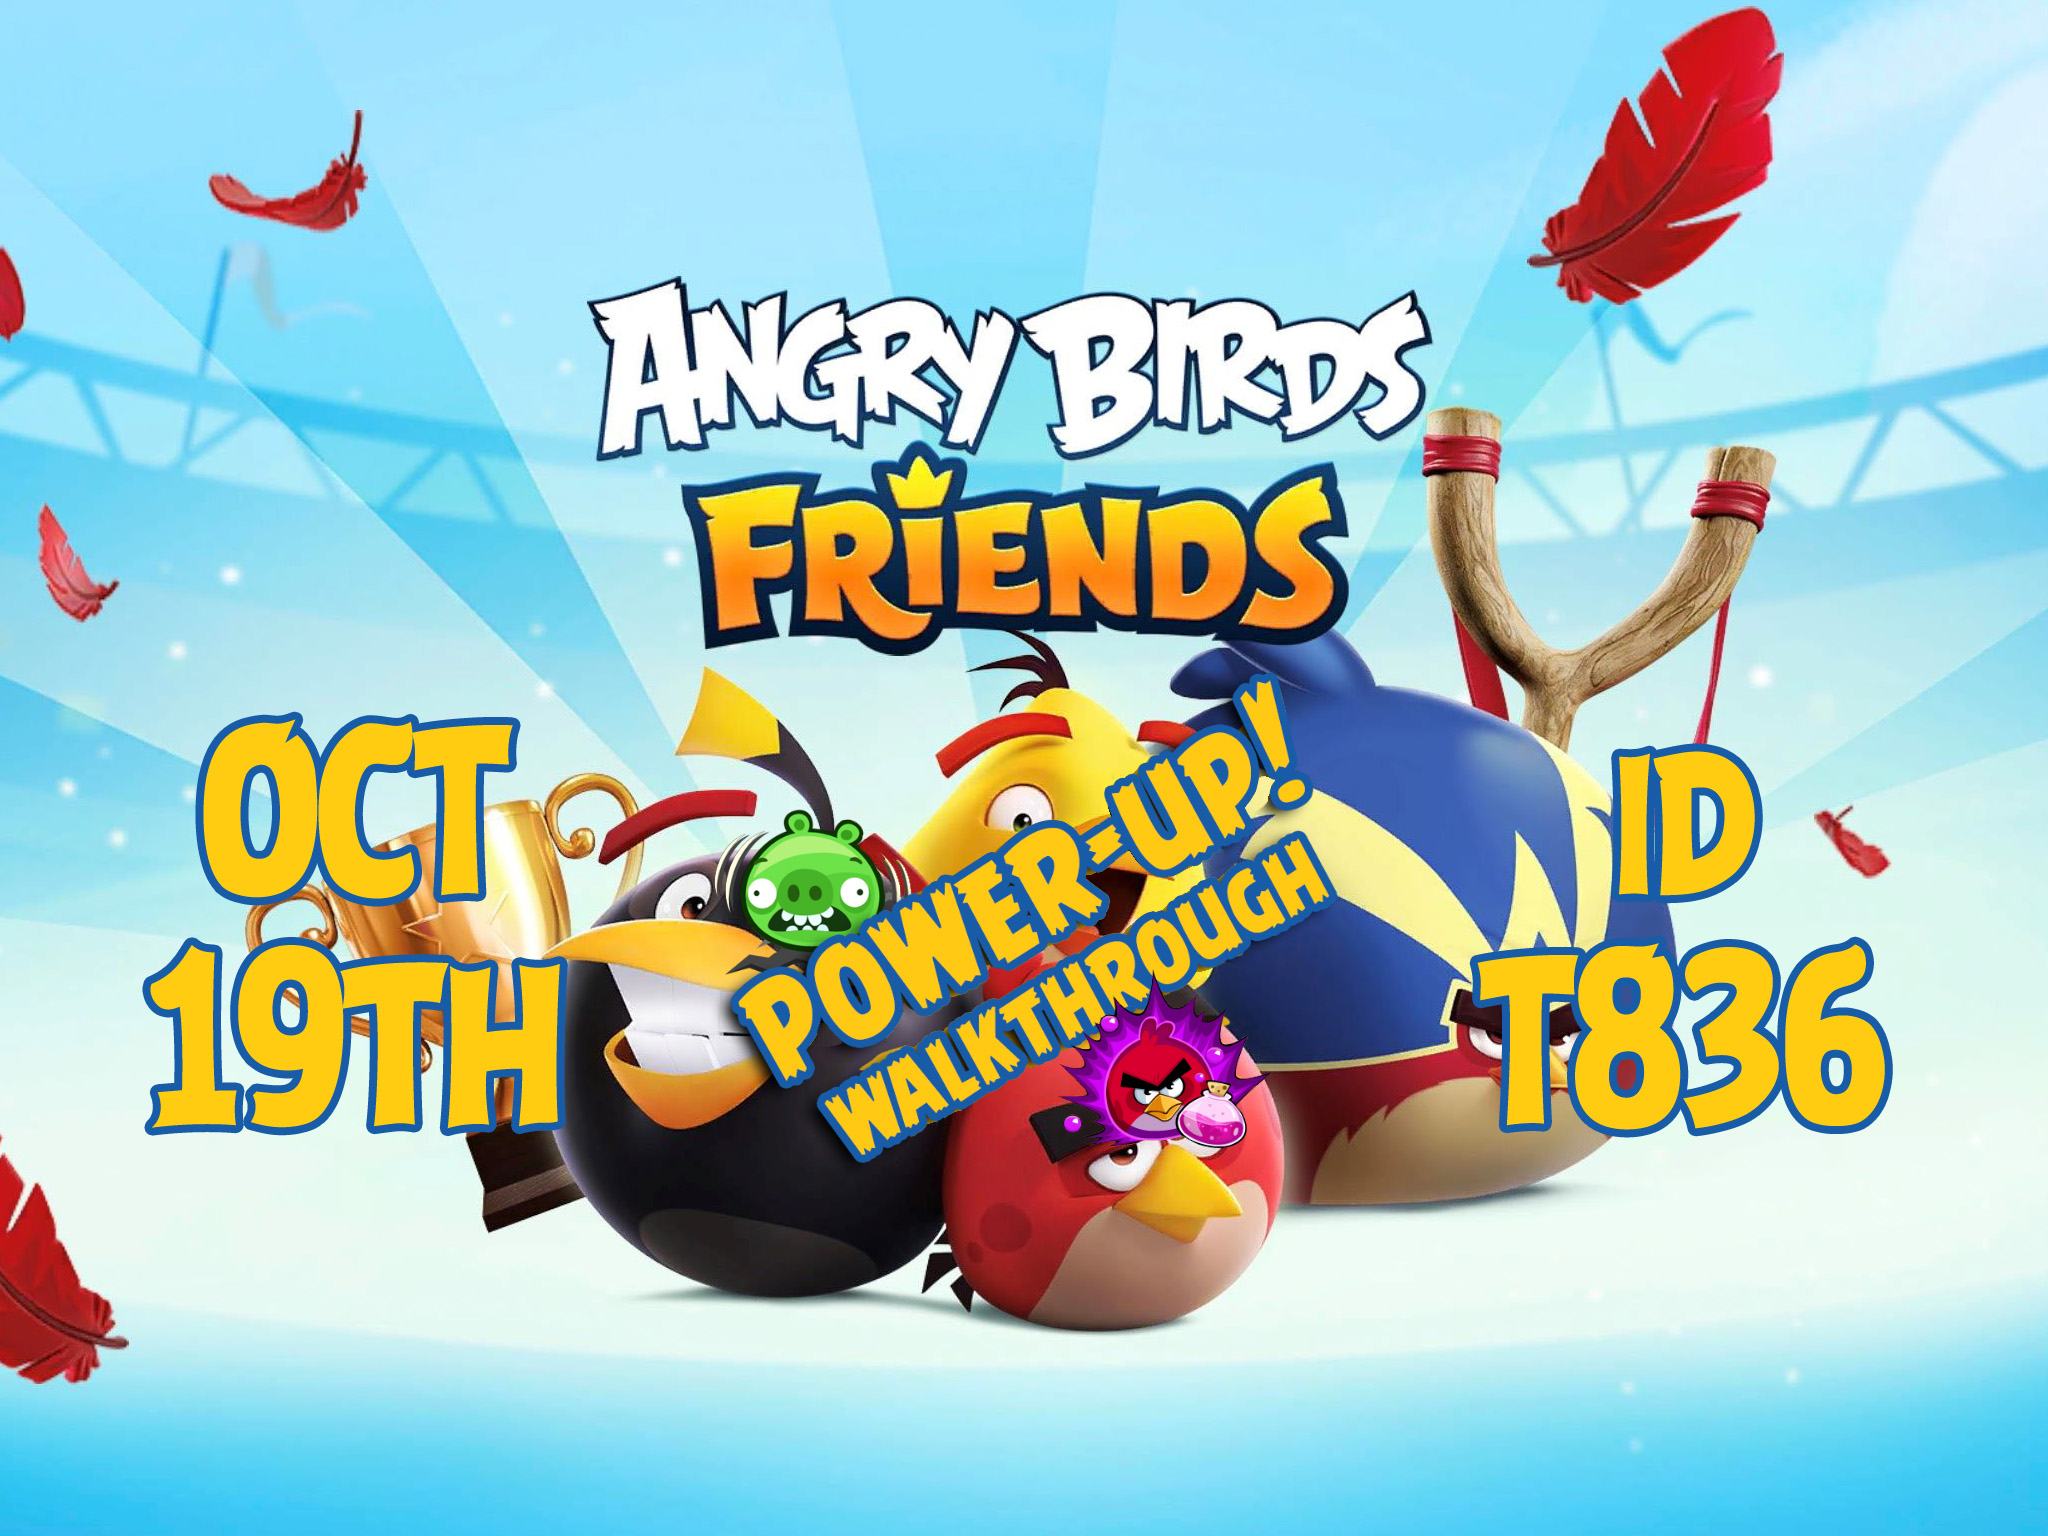 Angry-Birds-Friends-Tournament-T836-Feature-Image-PU